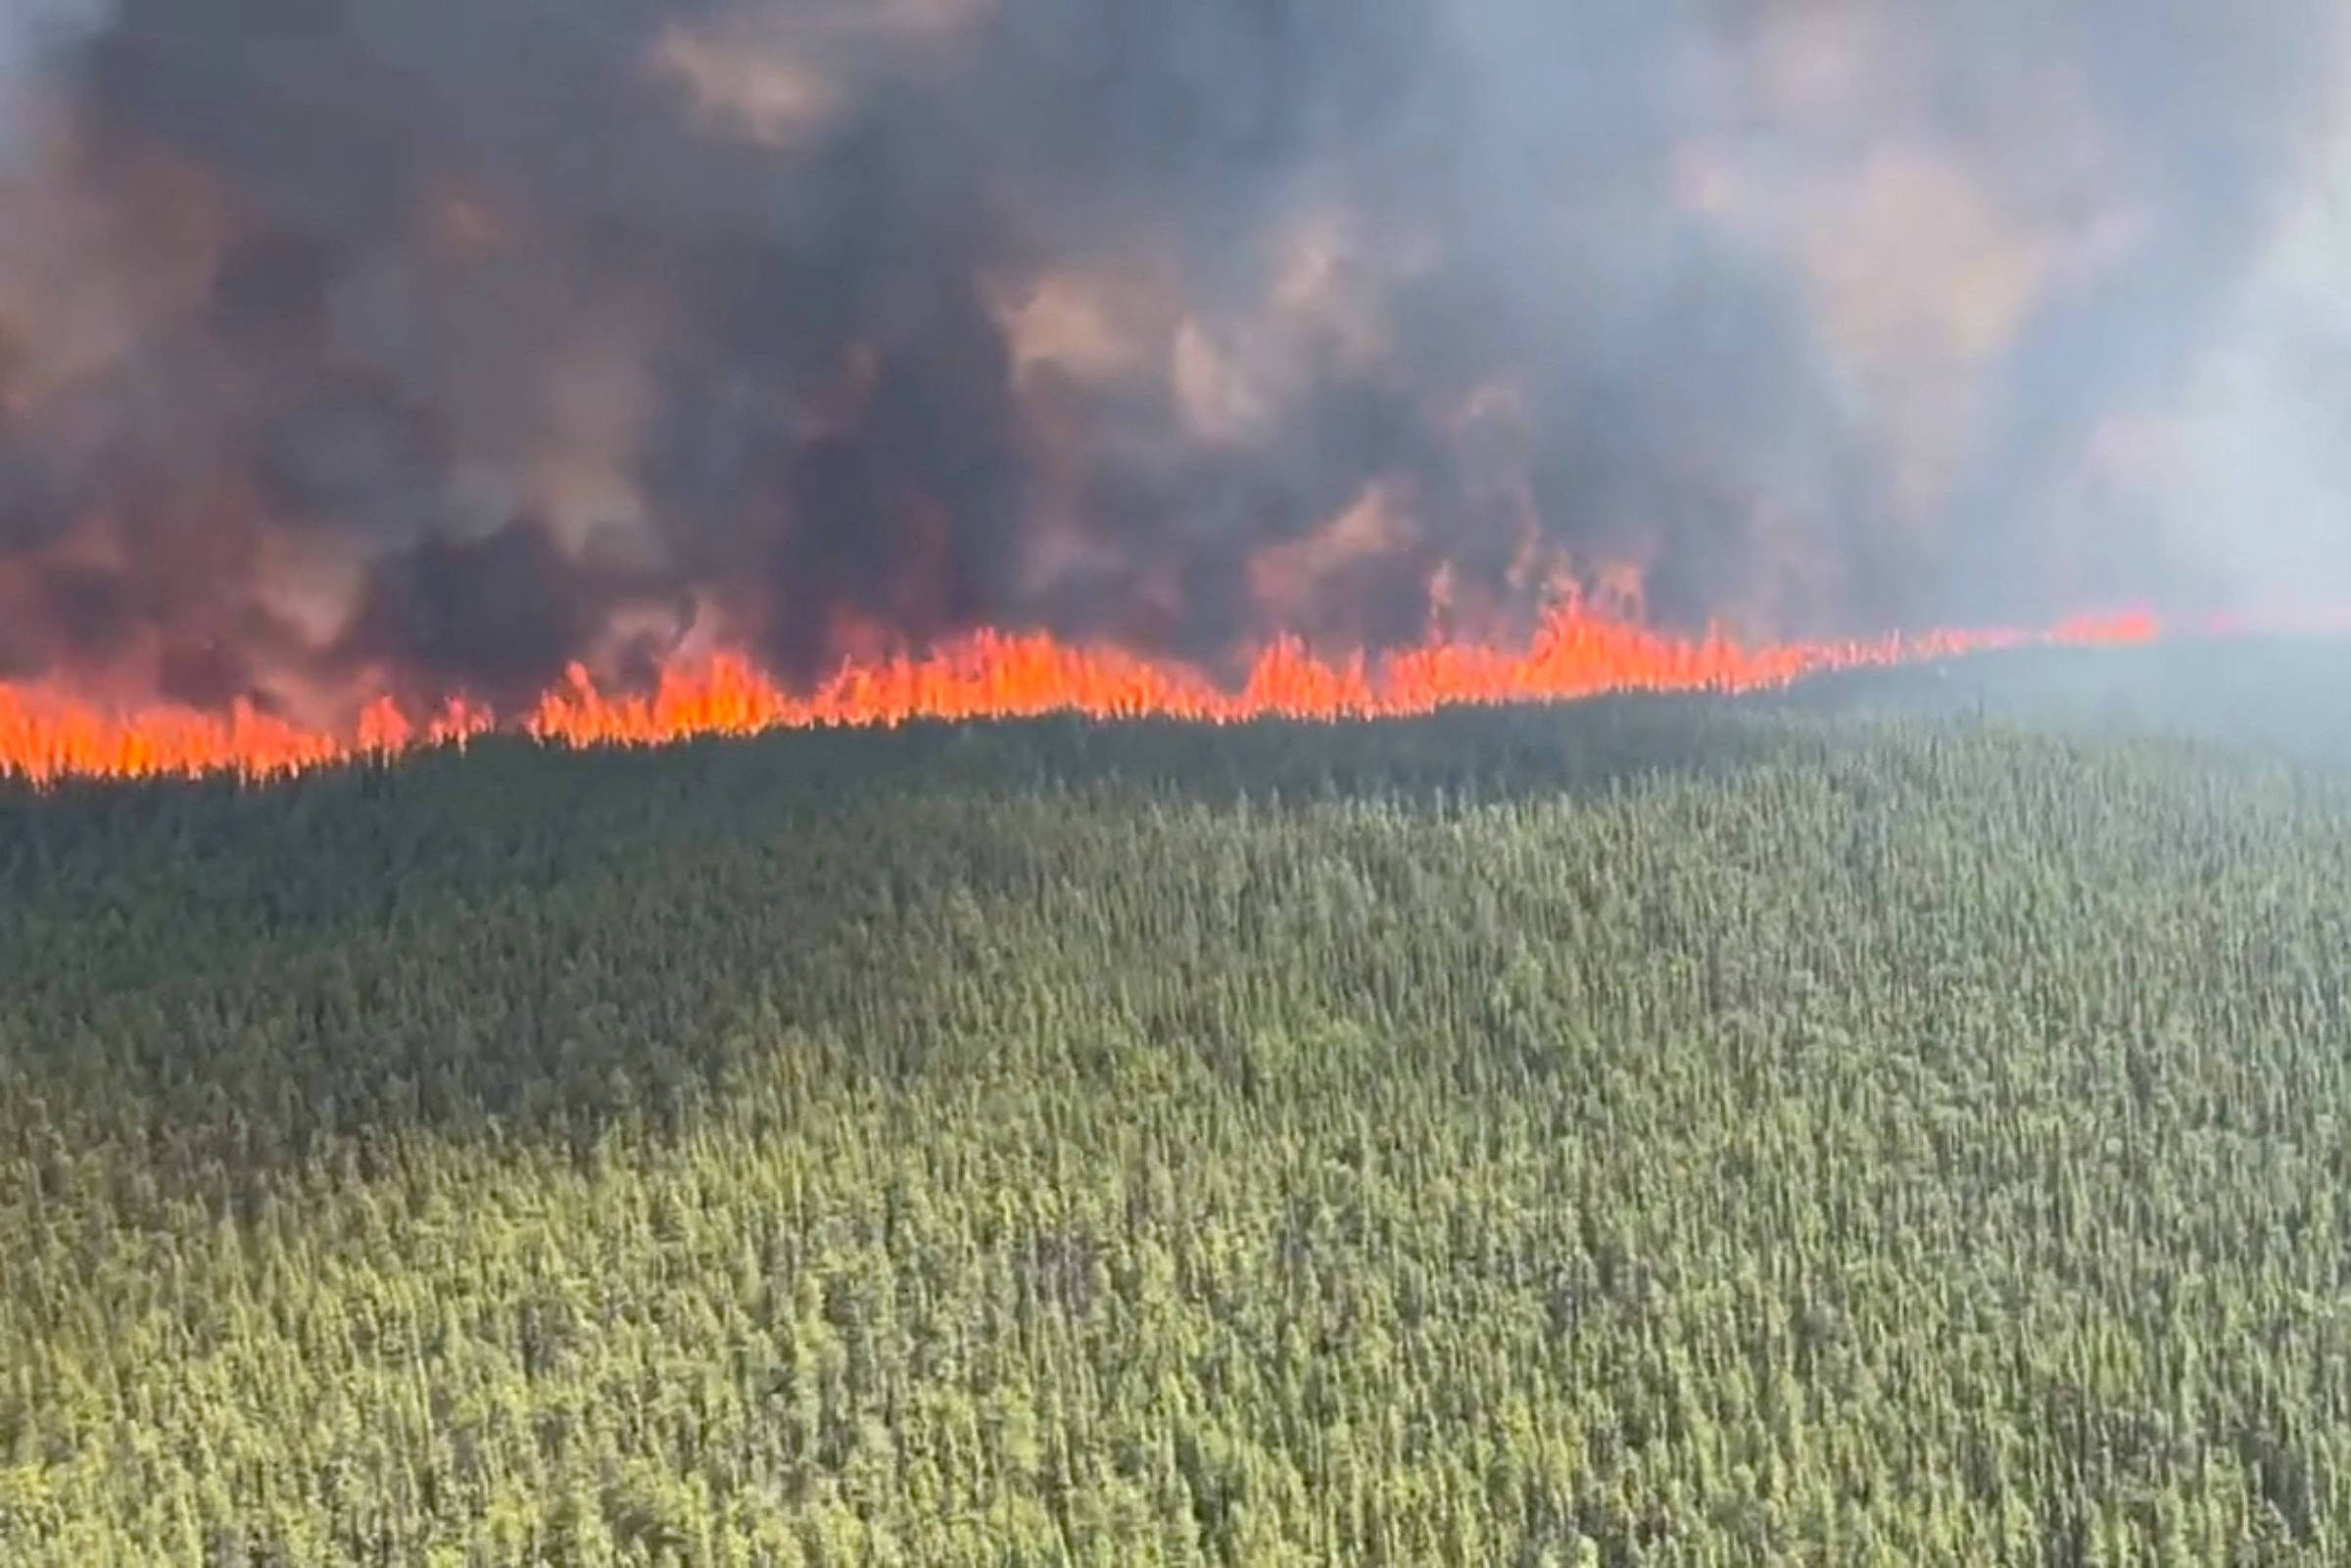 Smoke from wildfires in Canada crosses ocean and is detected in Norway